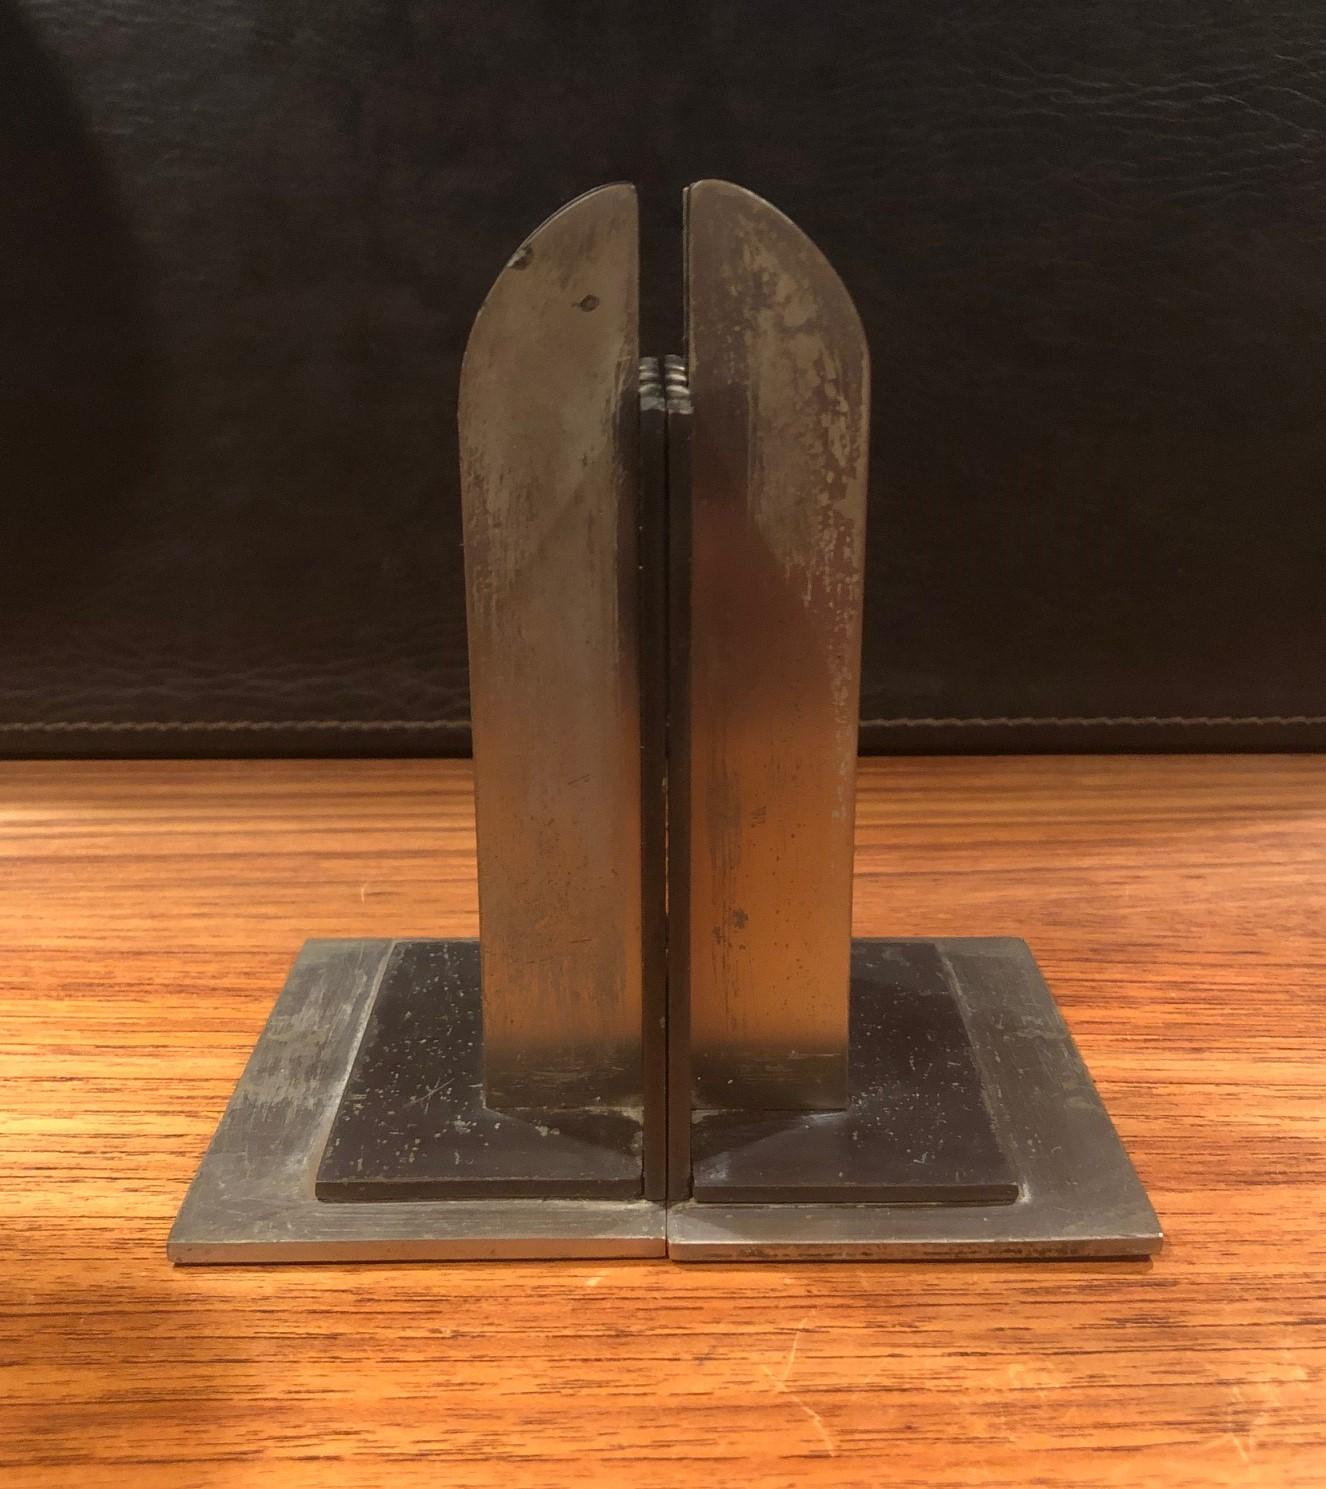 Pair of Machine Age Art Deco Bookends by Walter Von Nessen for Chase & Co. No 1